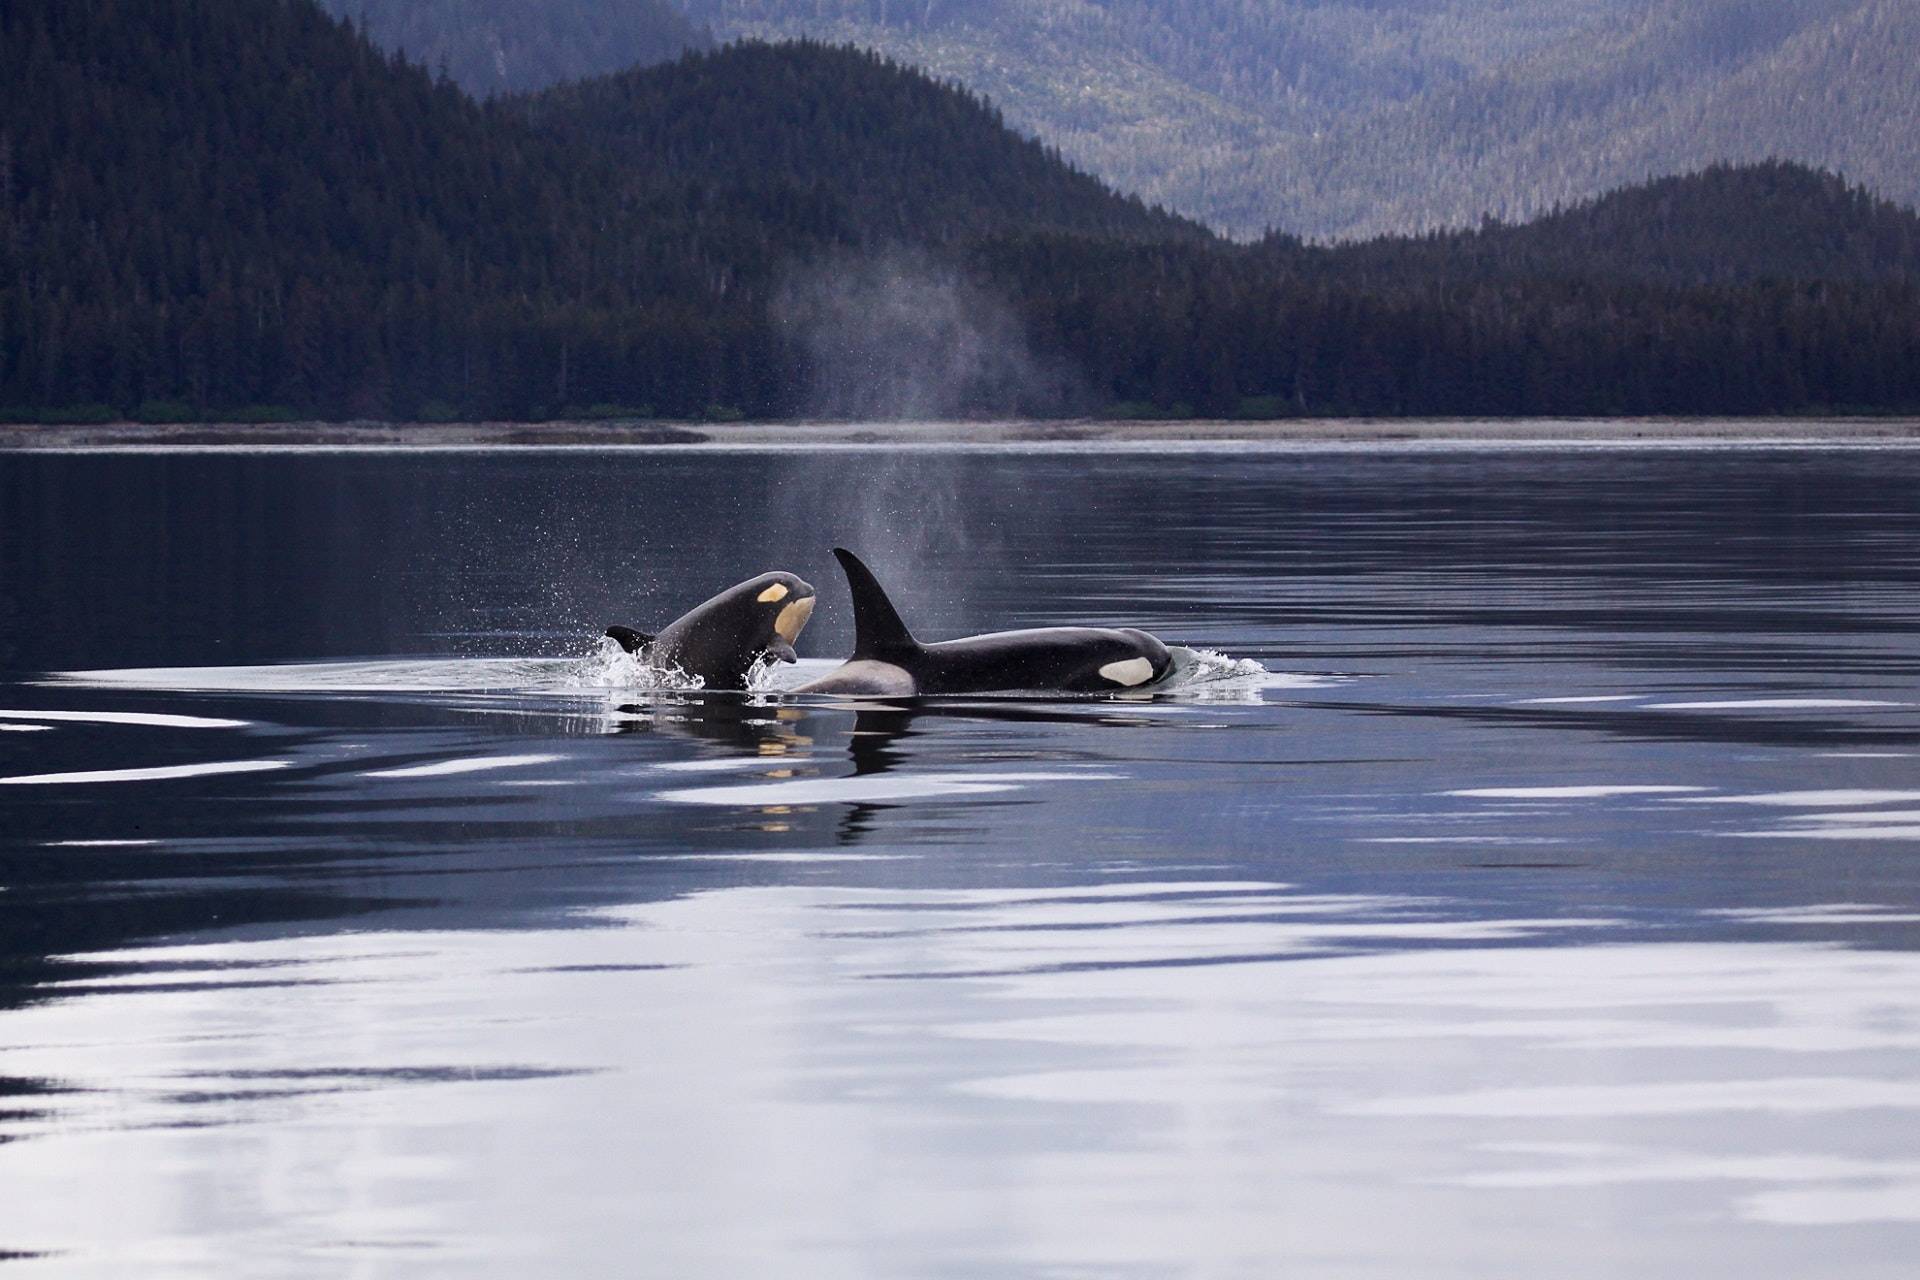 Orca Conservancy is a non-profit organization working on behalf of Orcinus orca, the killer whale, and protecting the endangered orcas and the wild places in which they live